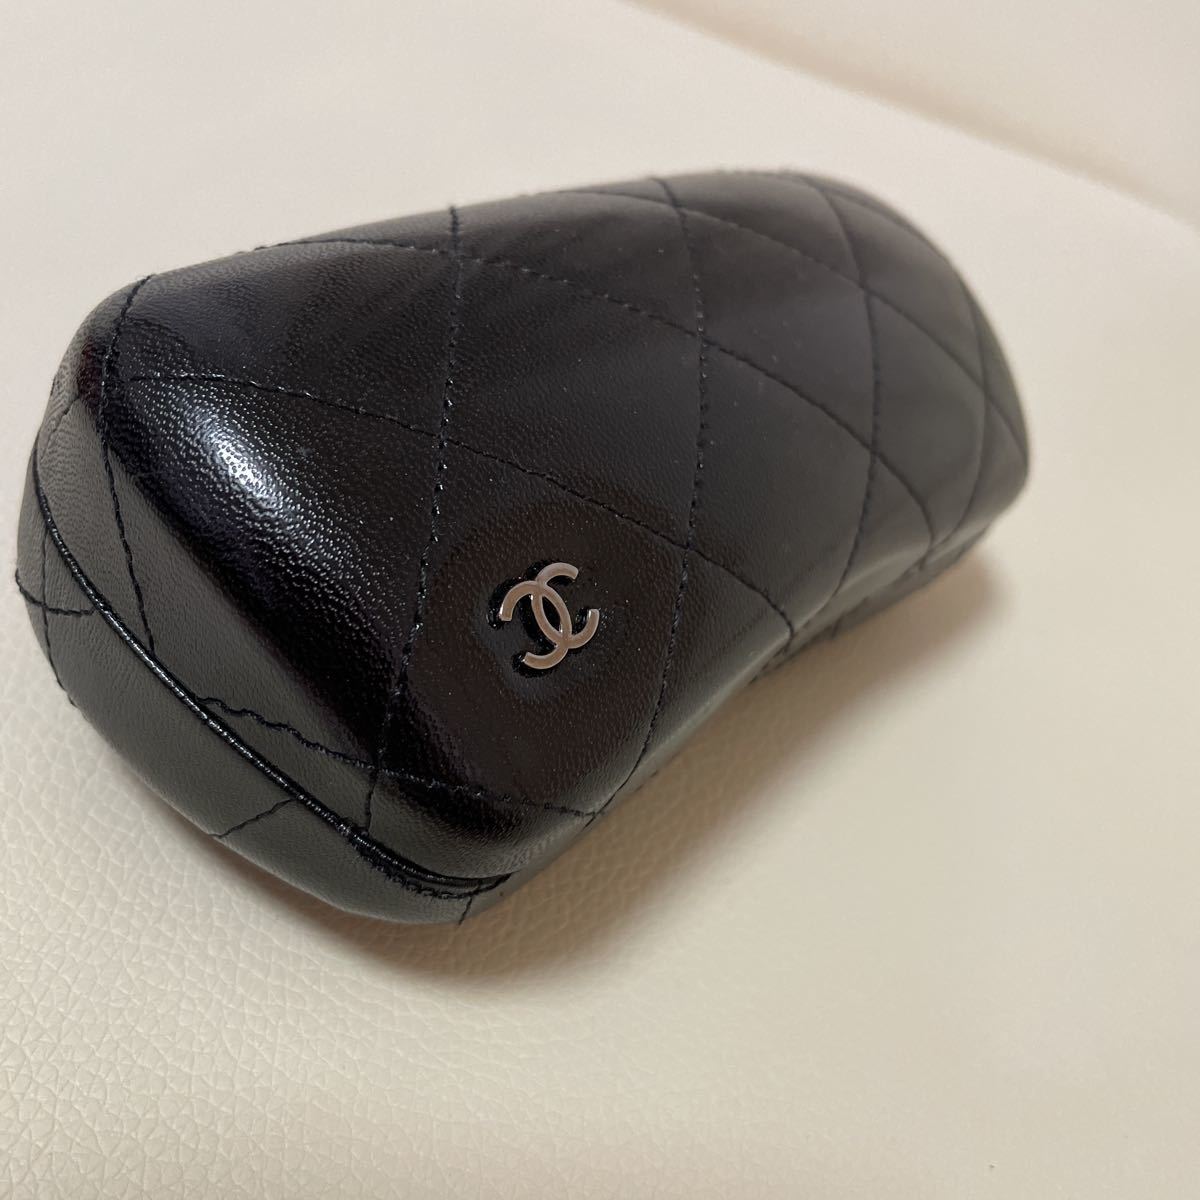  Chanel sunglasses case glasses case CHANEL quilting here Mark 